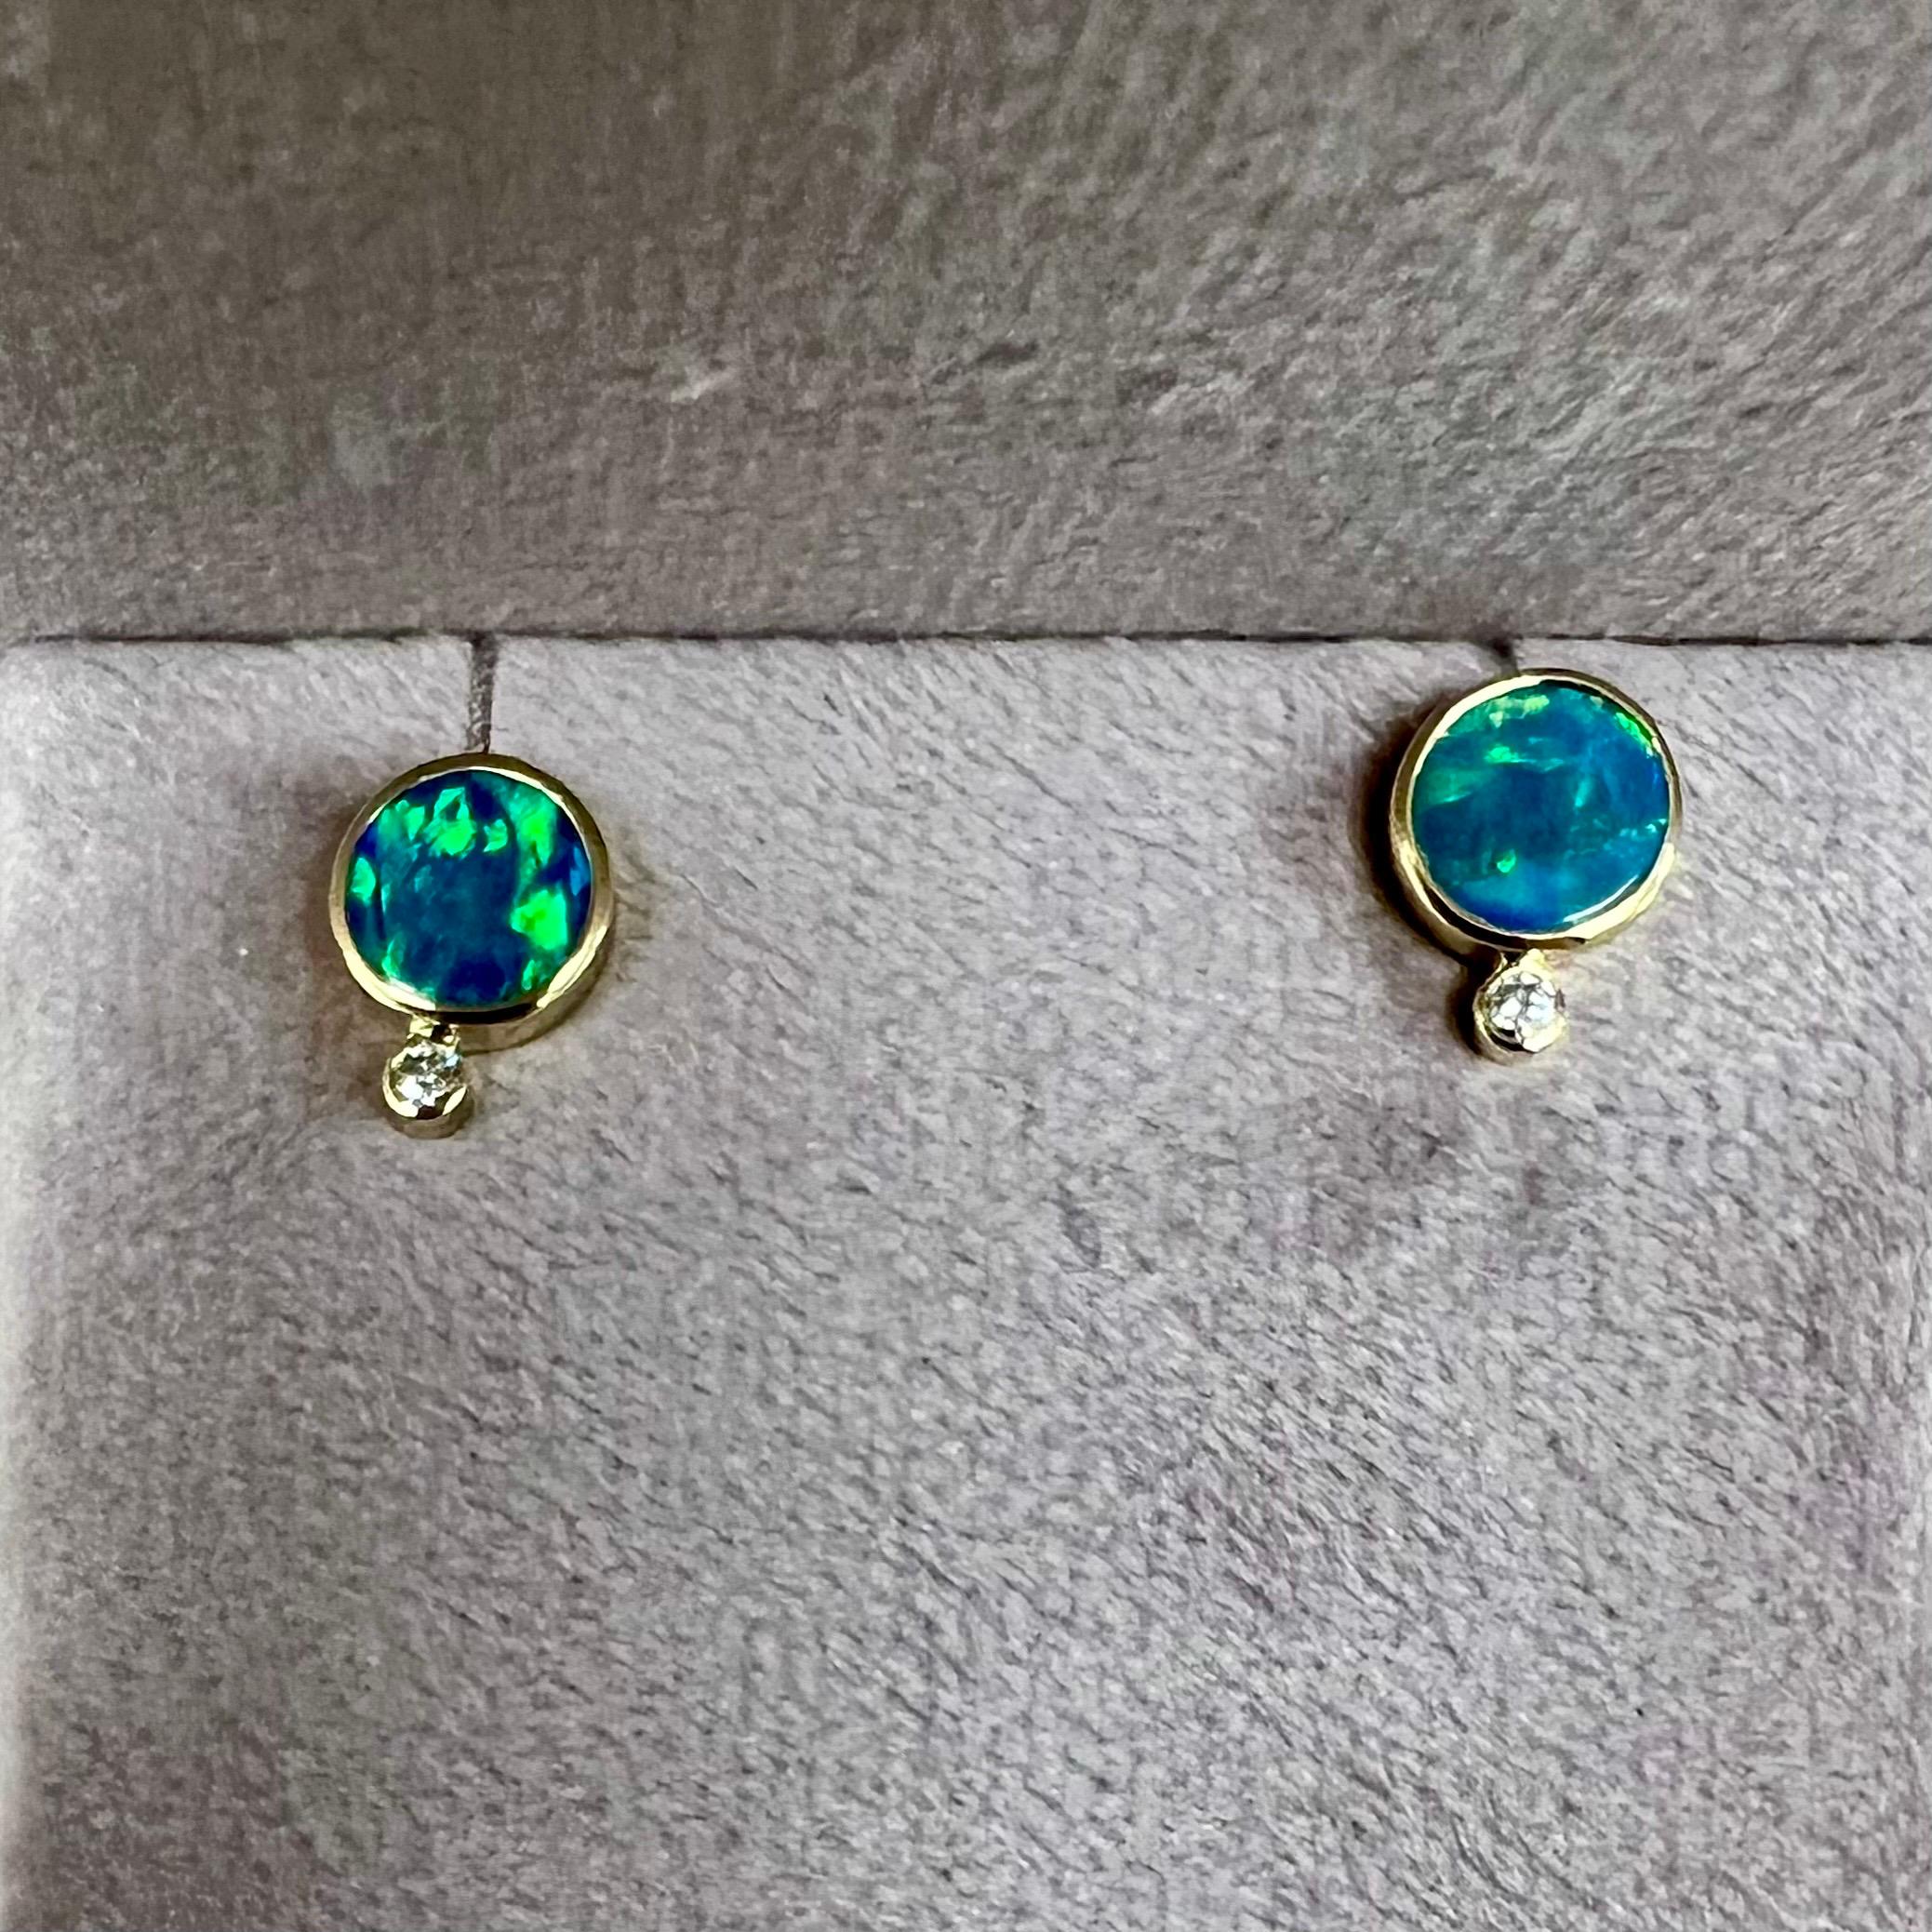 Created in 18 karat yellow gold
Boulder Opal 2.30 carats approx.
Diamonds 0.05 carat approx.
Post backs for pierced ears
Limited edition



About the Designers ~ Dharmesh & Namrata

Drawing inspiration from little things, Dharmesh & Namrata Kothari